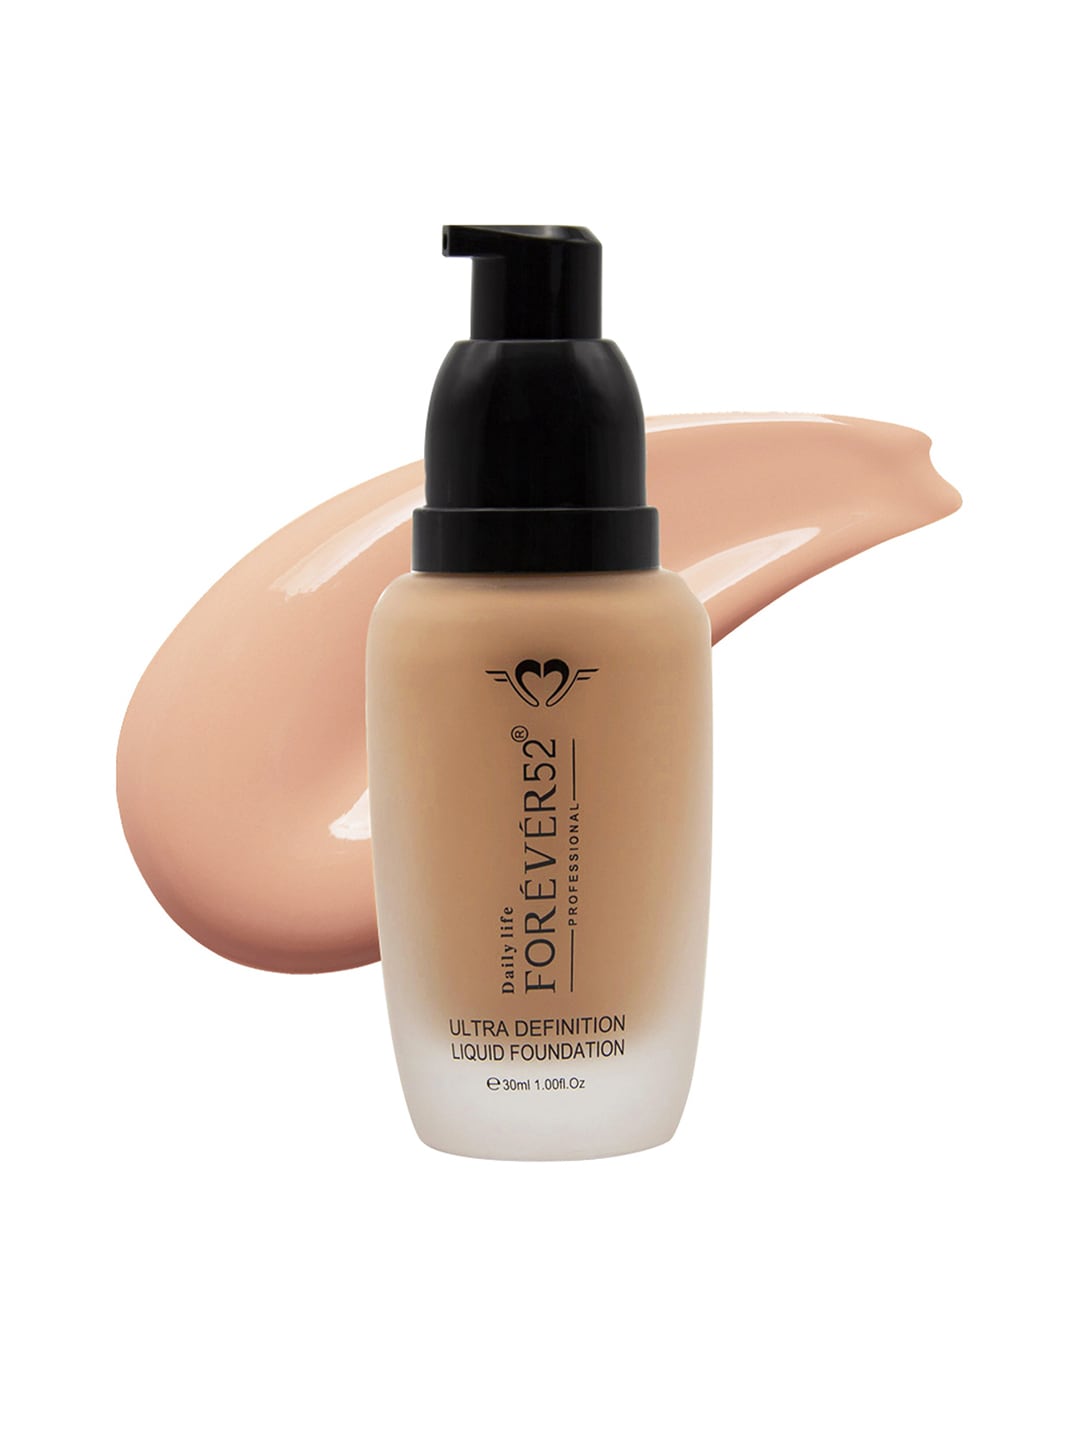 Daily Life Forever52 Ultra Definition Liquid Foundation - Chocolate Mousse Price in India